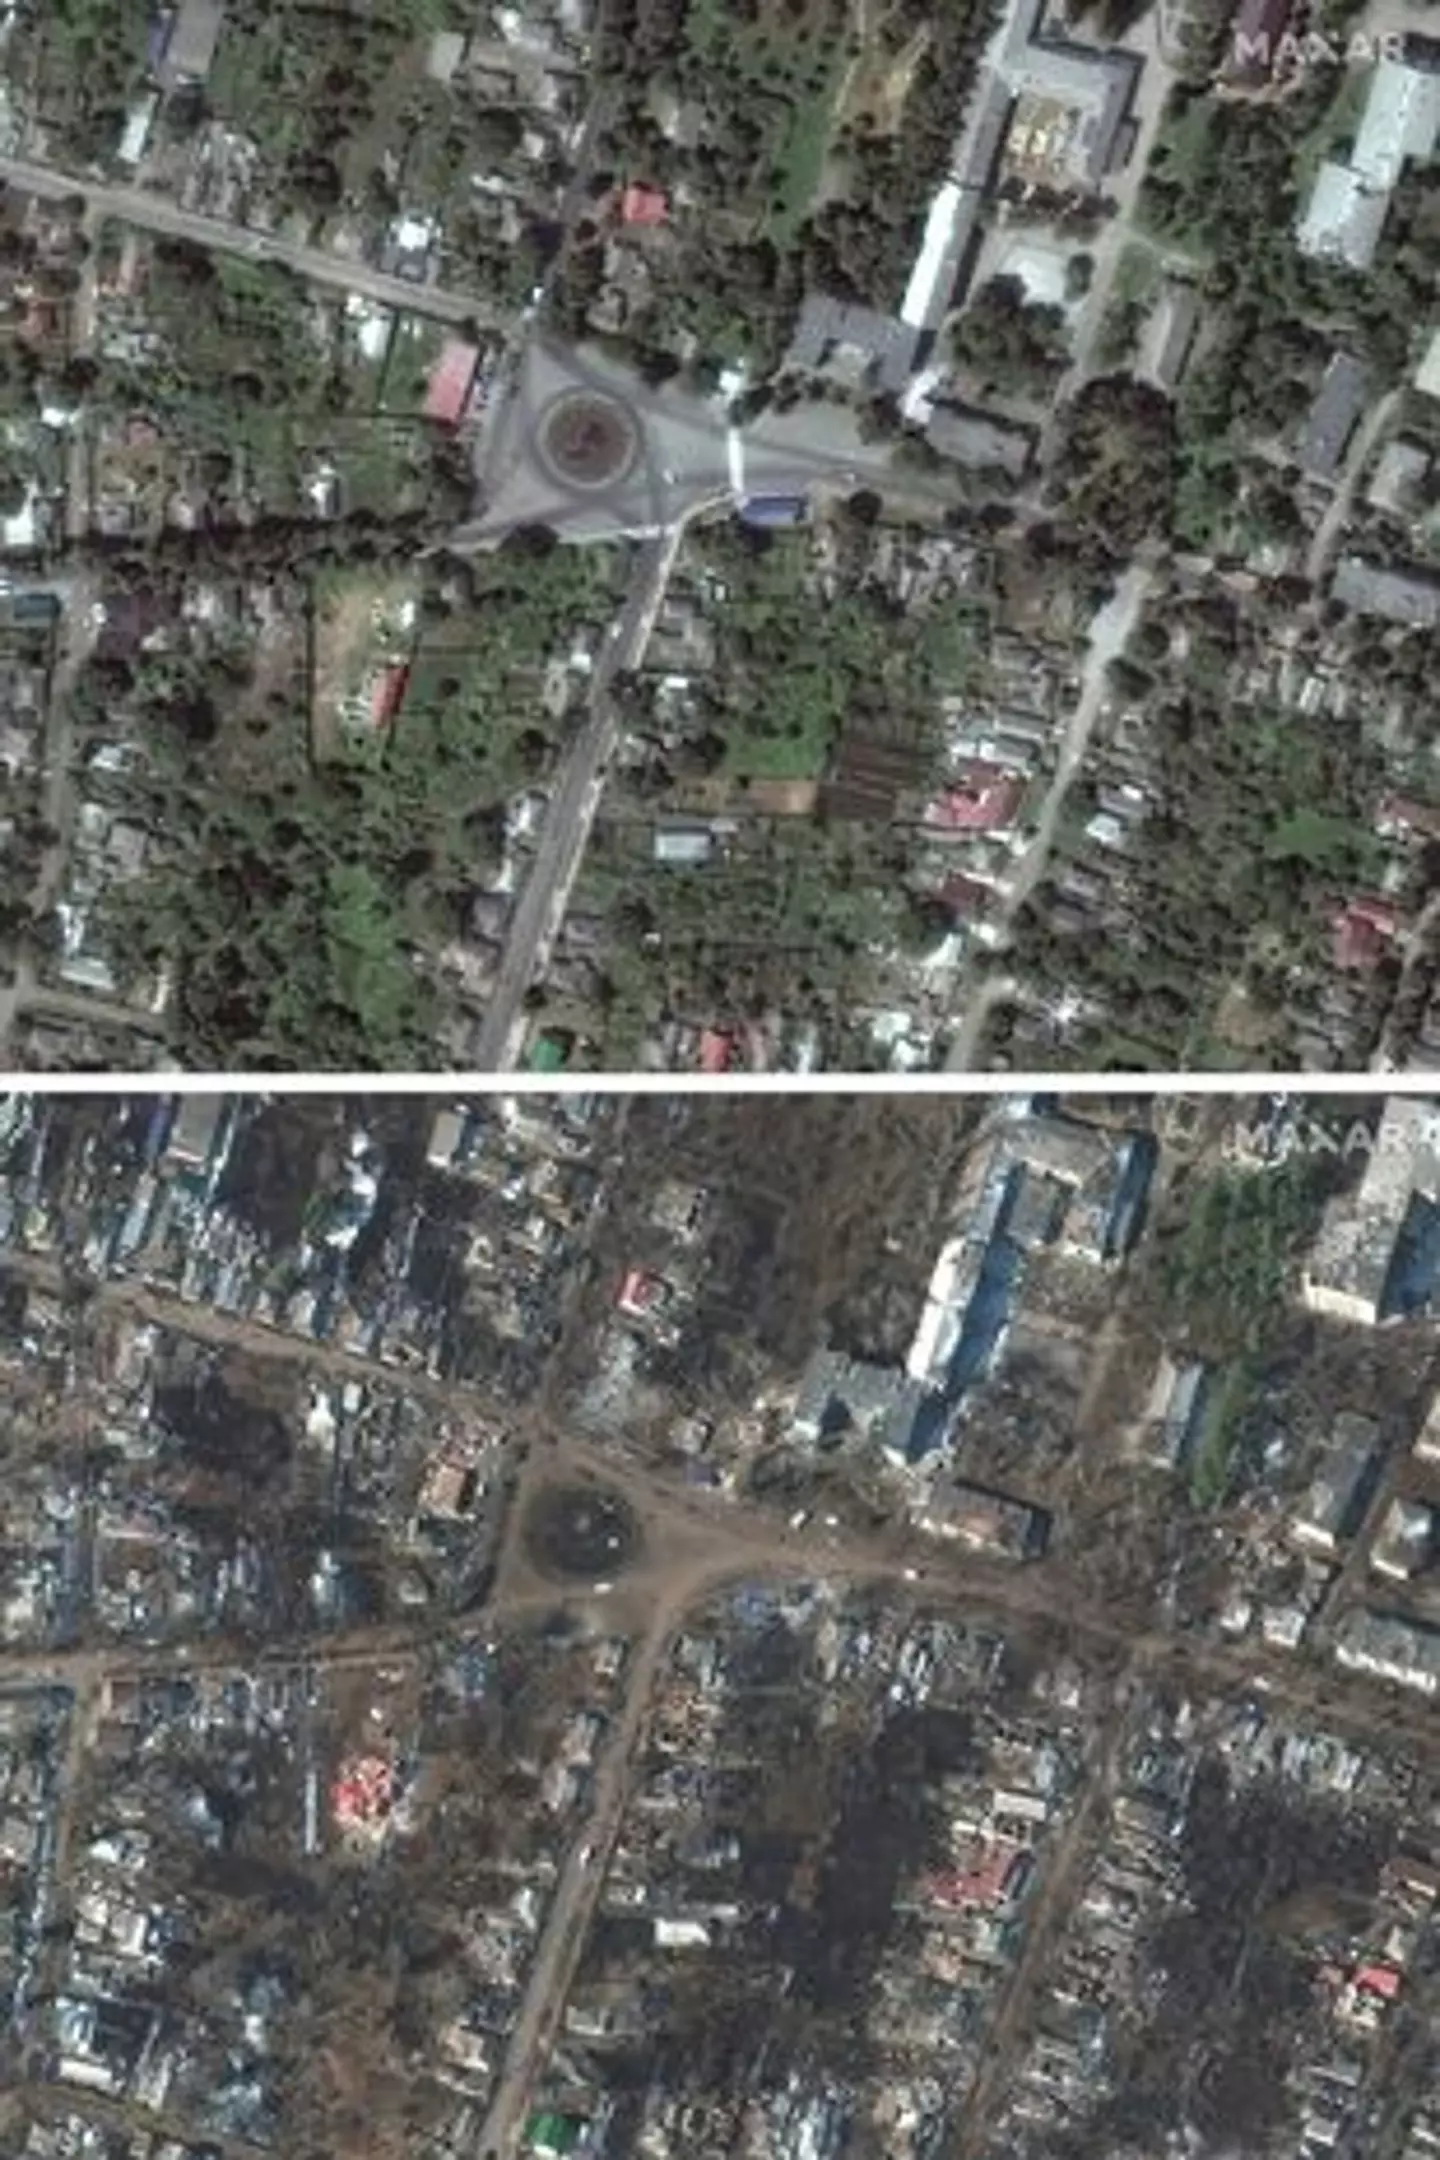 Before and after comparison of damaged homes and buildings in Sumy, Ukraine.